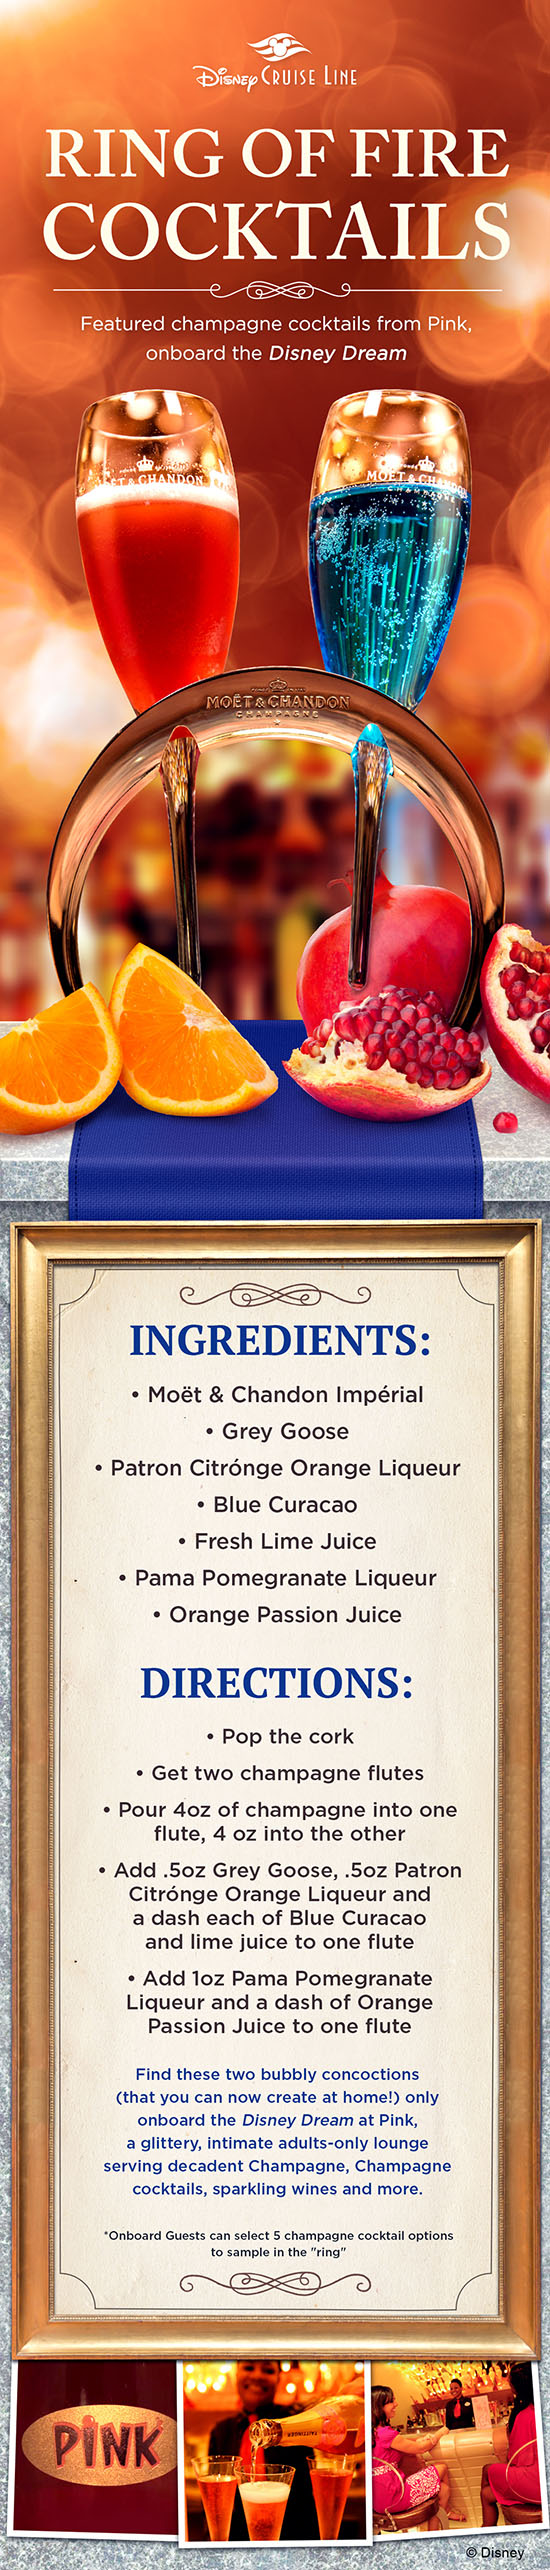 Recipe for Ring of Fire Cocktail at Pink on the Disney Dream